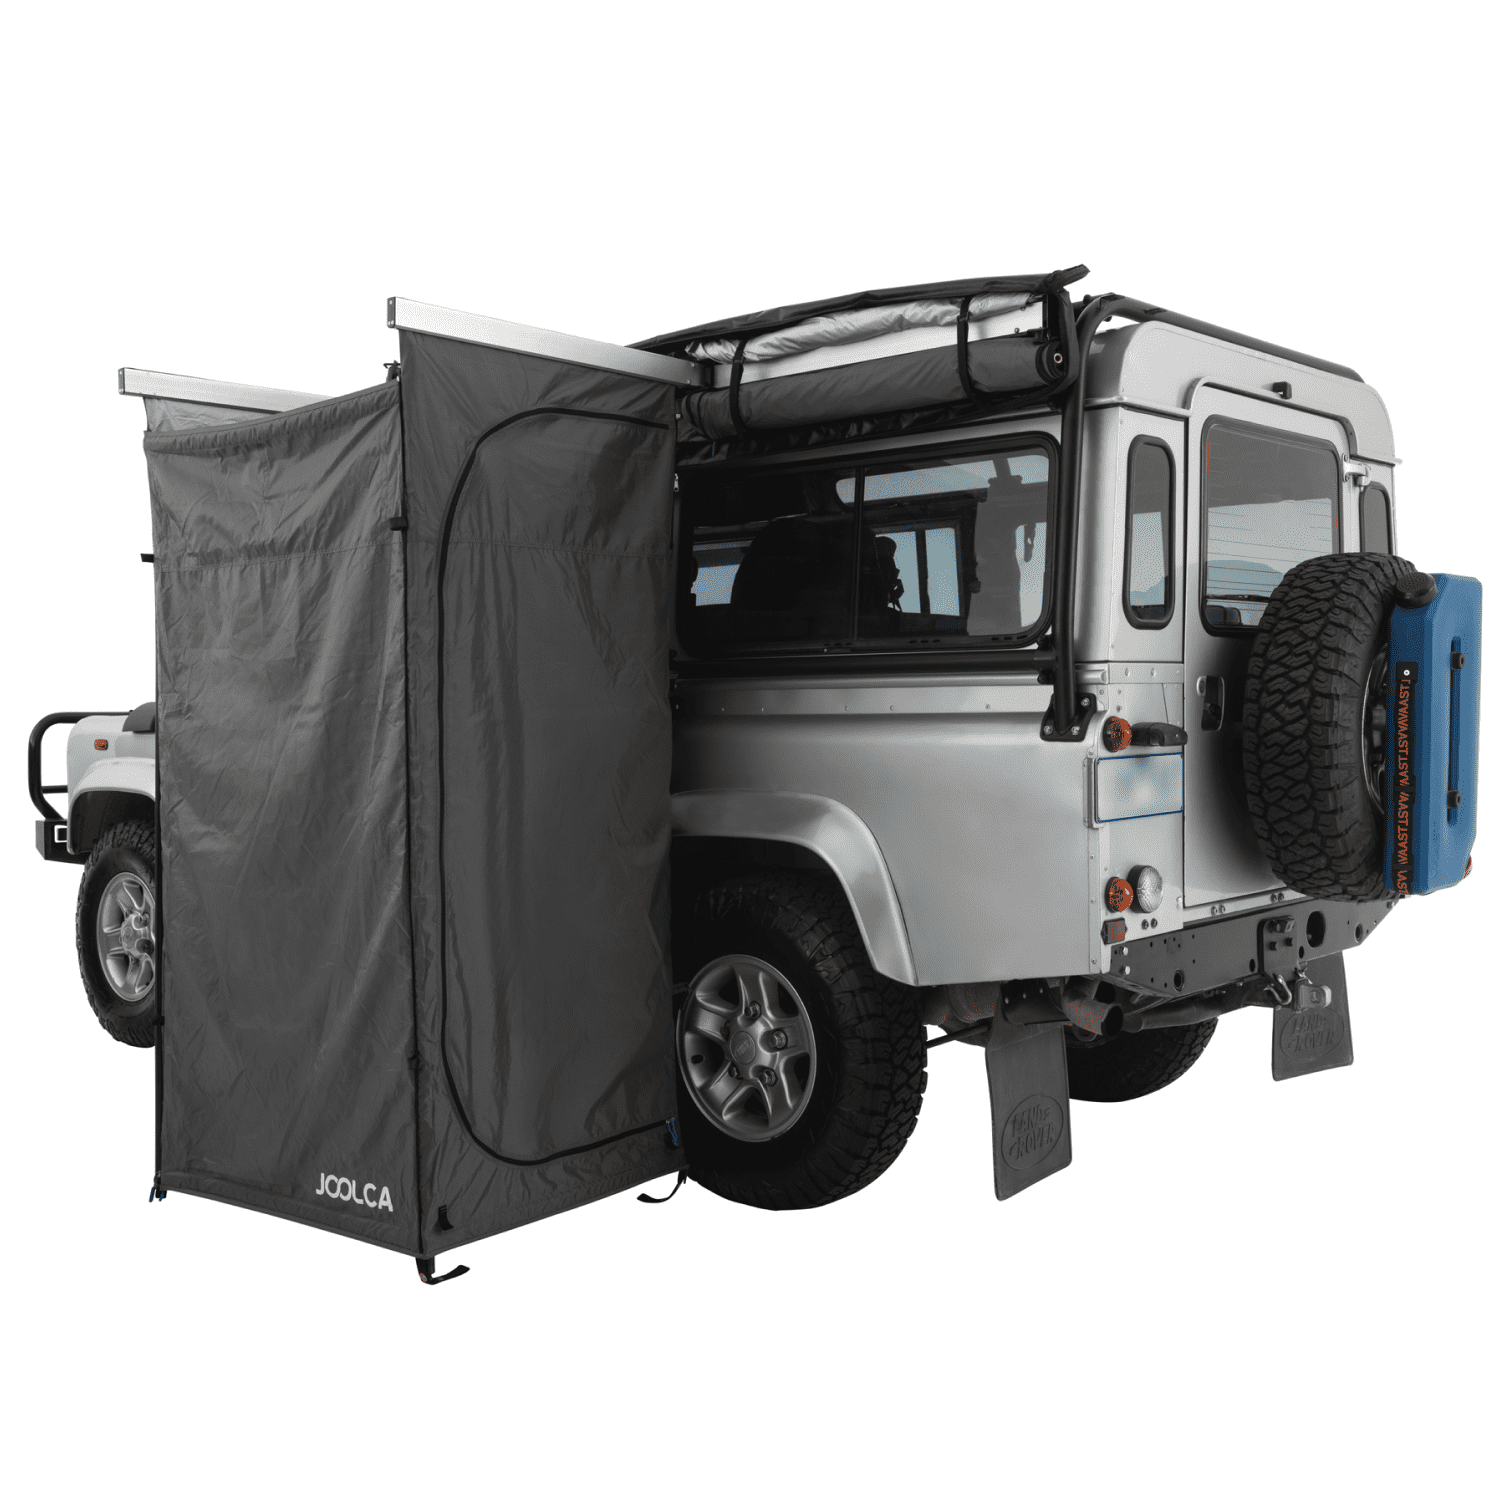 A side angle of a land rover 4WD with a mounted double Joolca branded shower tent attached